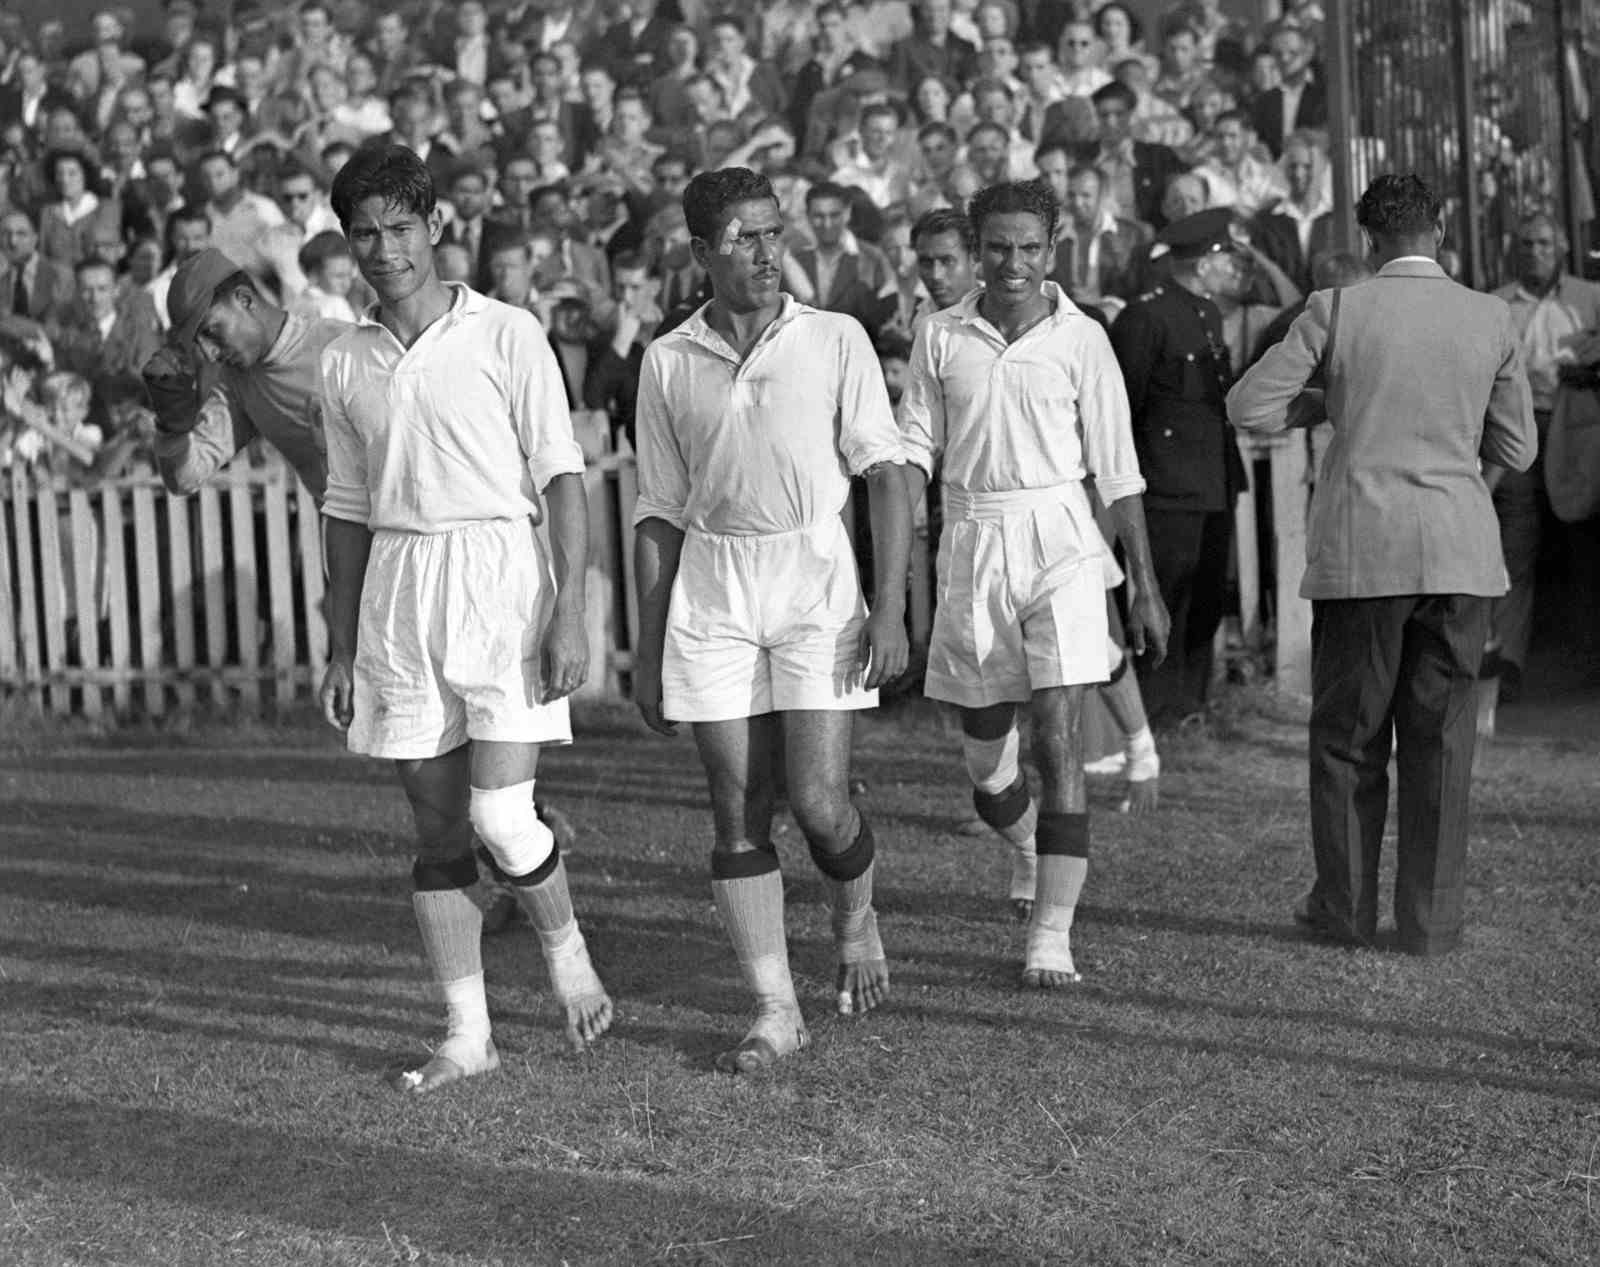 Bare-footed India players walk out at Ilford for their match against France (Photo by Barratts/PA Images via Getty Images)